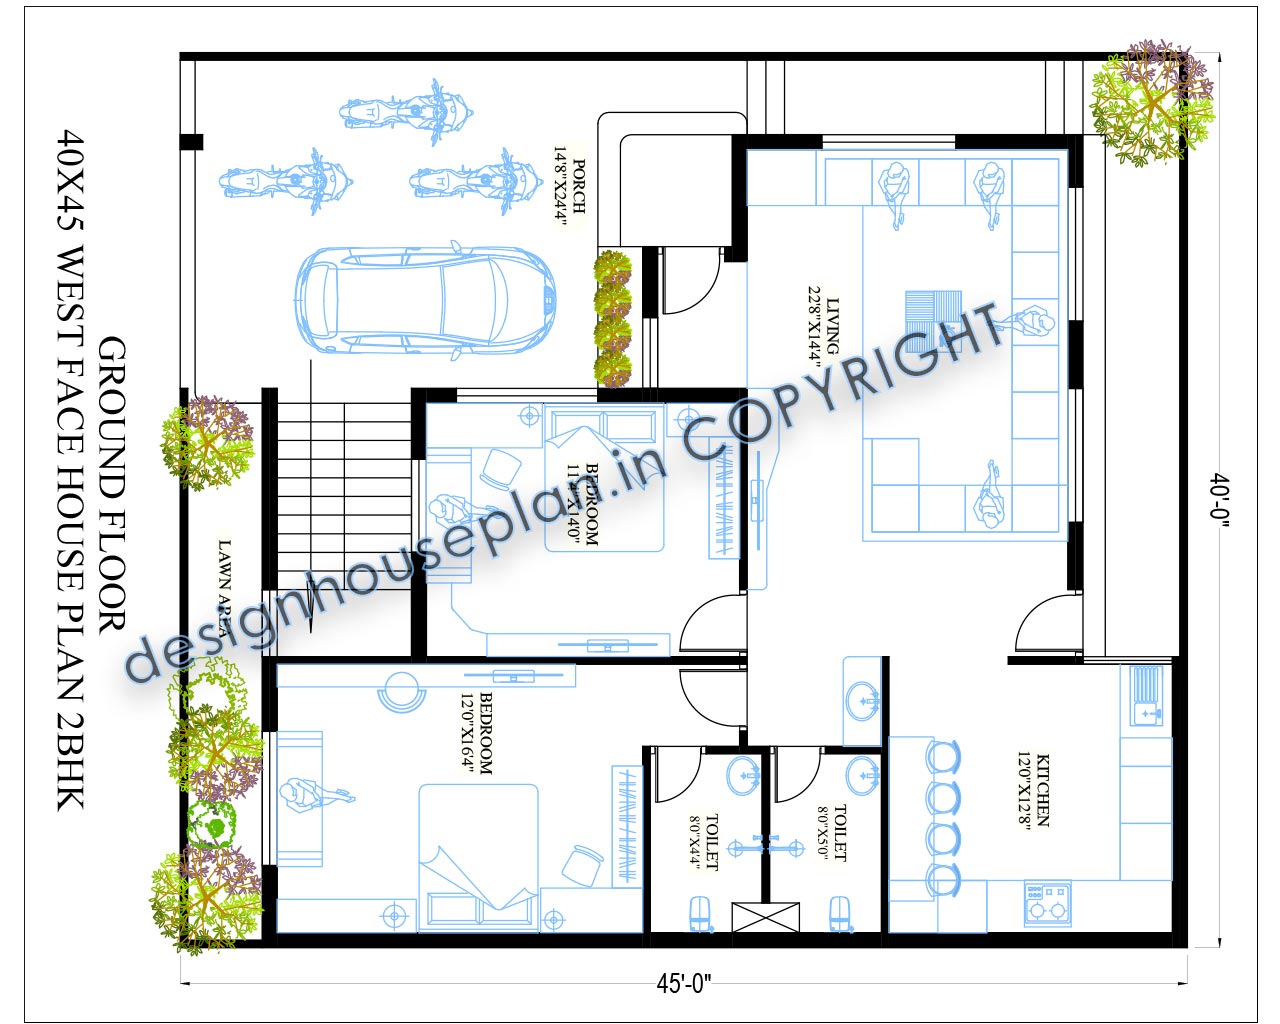 This is a 40x45 house plans with car parking west facing with 2 bedrooms and a lawn.